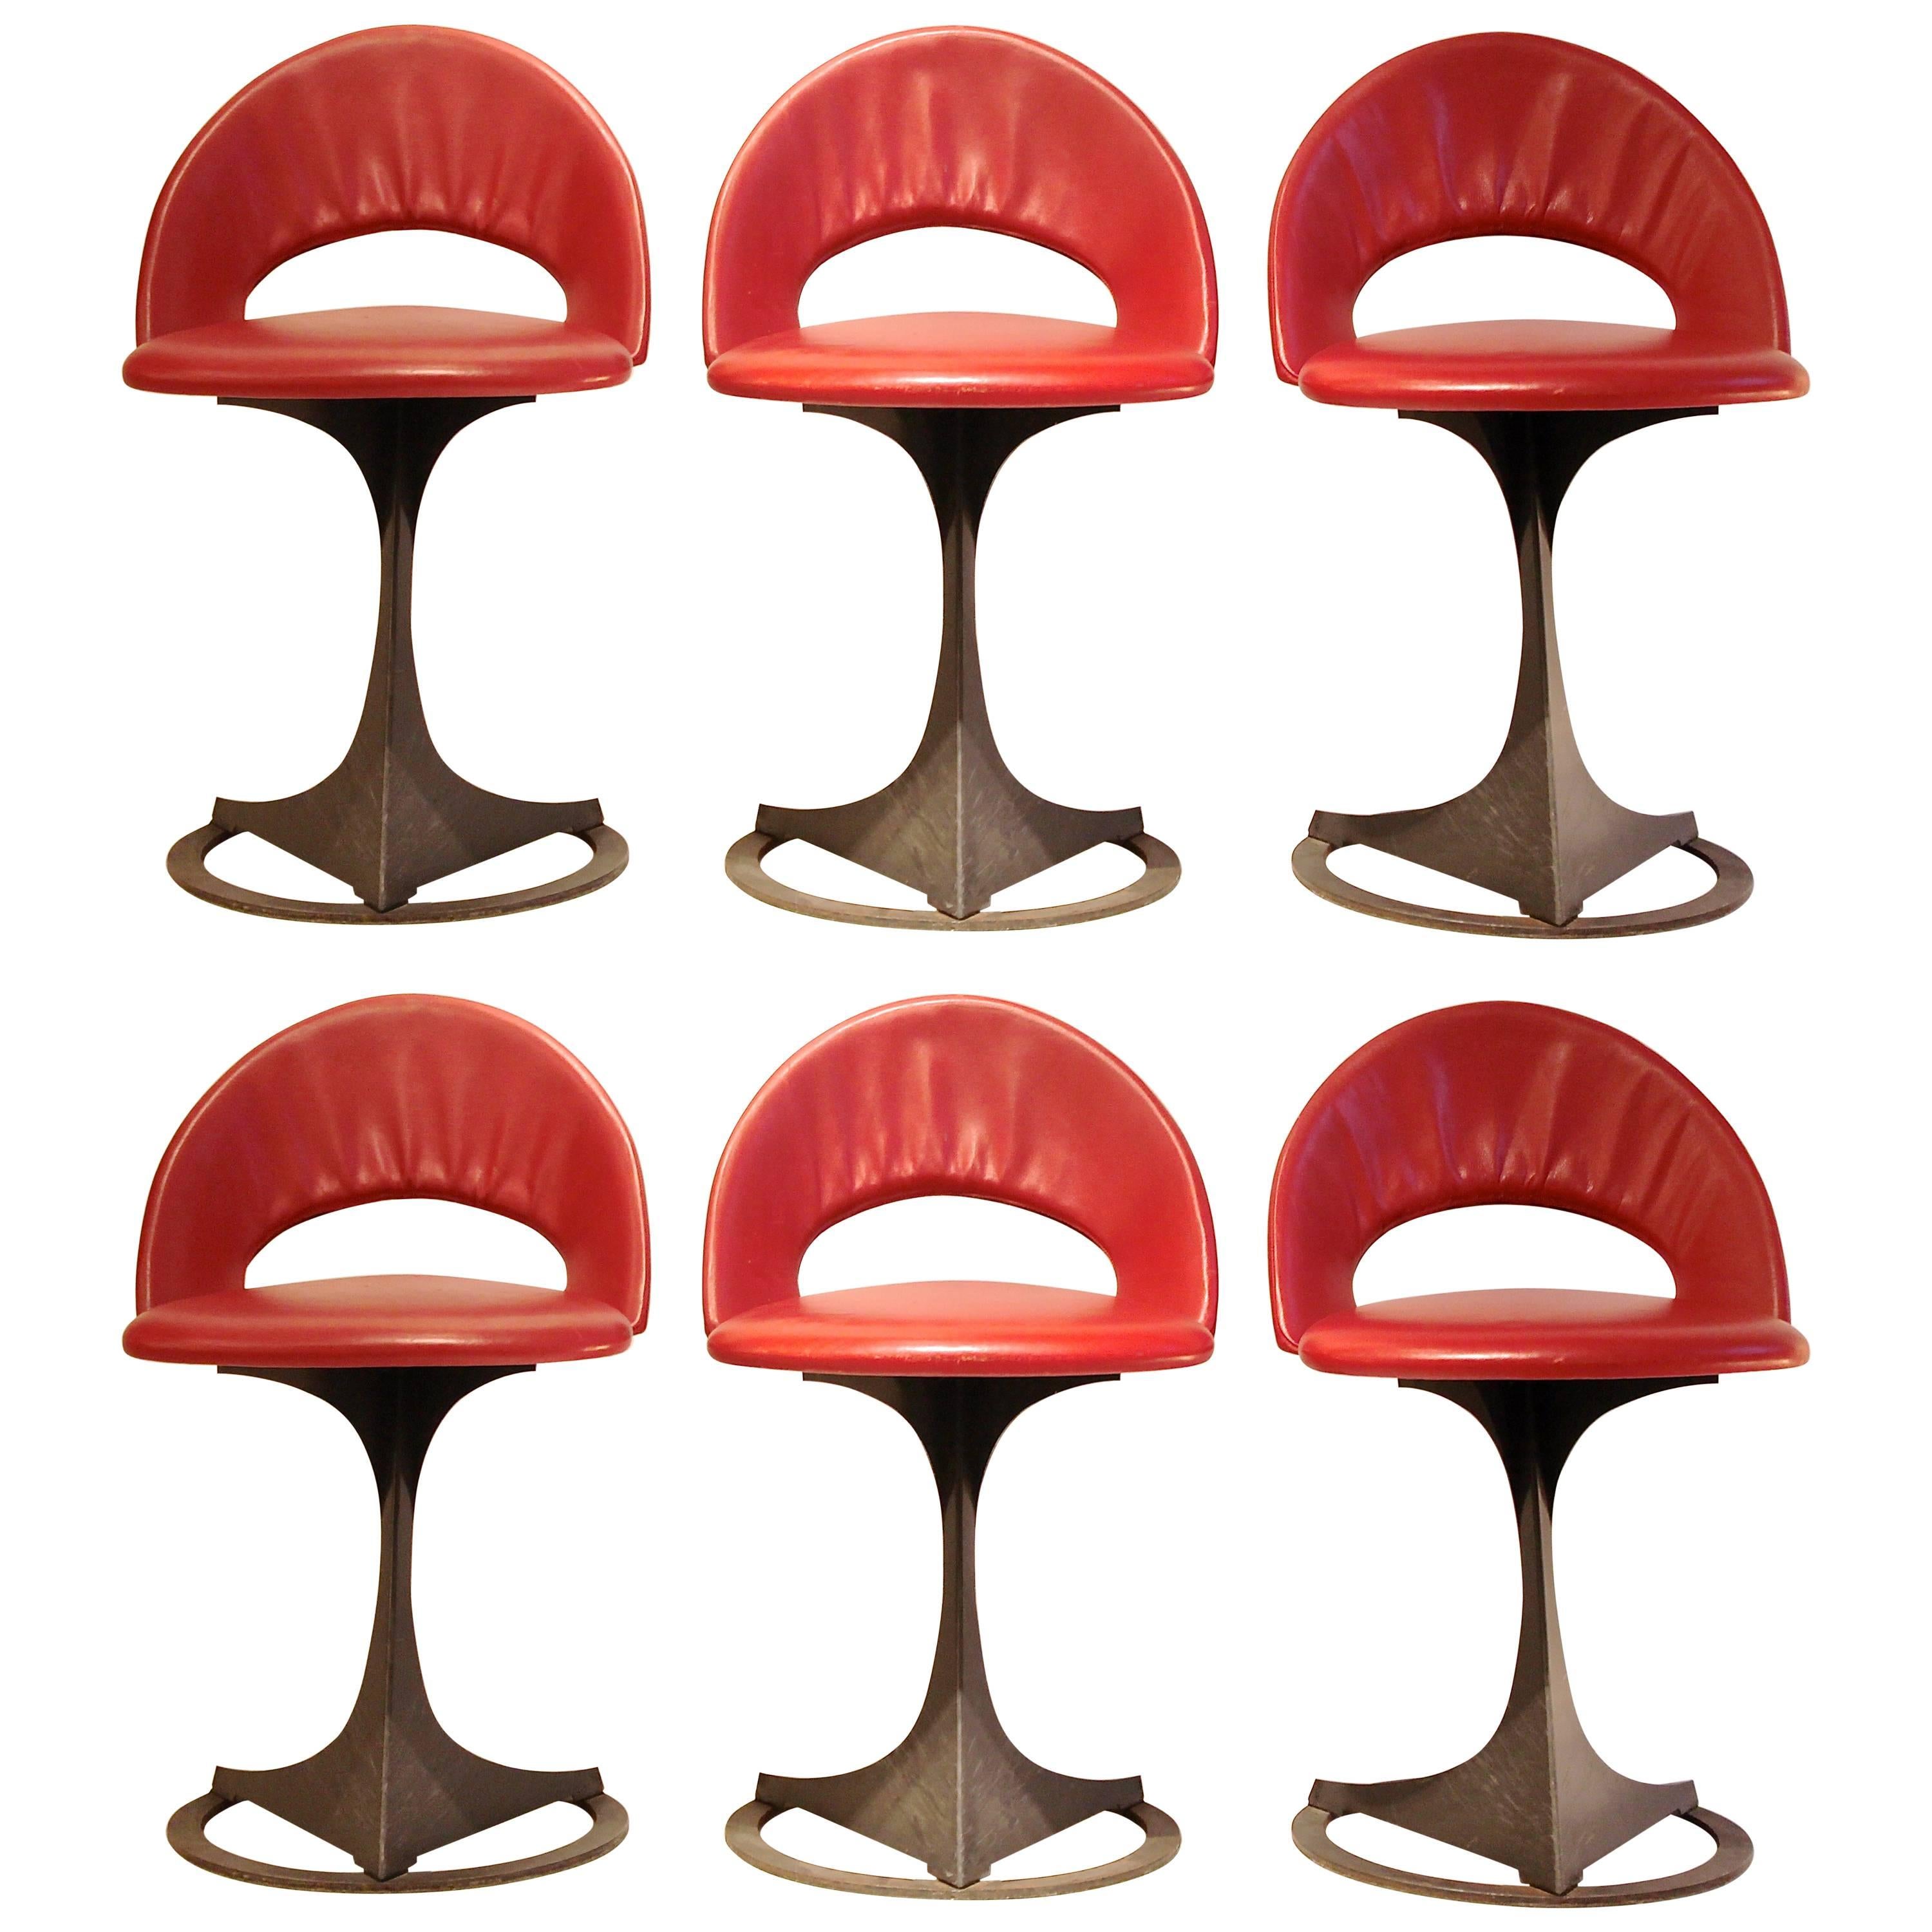 Set of Six Red Leather Chairs by Santiago Calatrava for Desede Switzerland, 1986